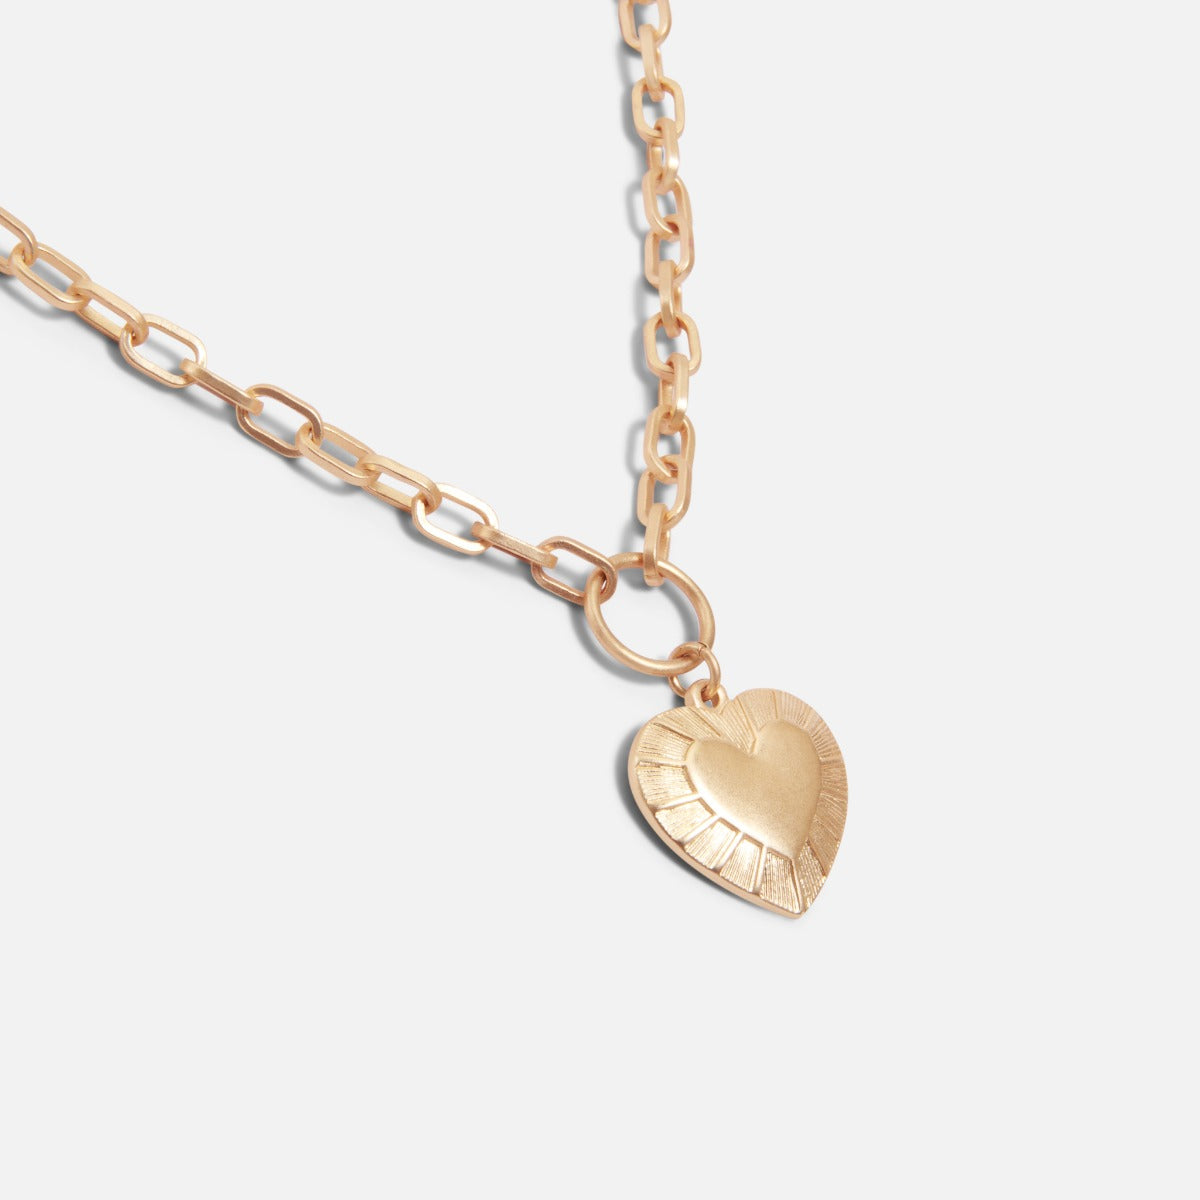 Wide gold chain pendant with heart charm